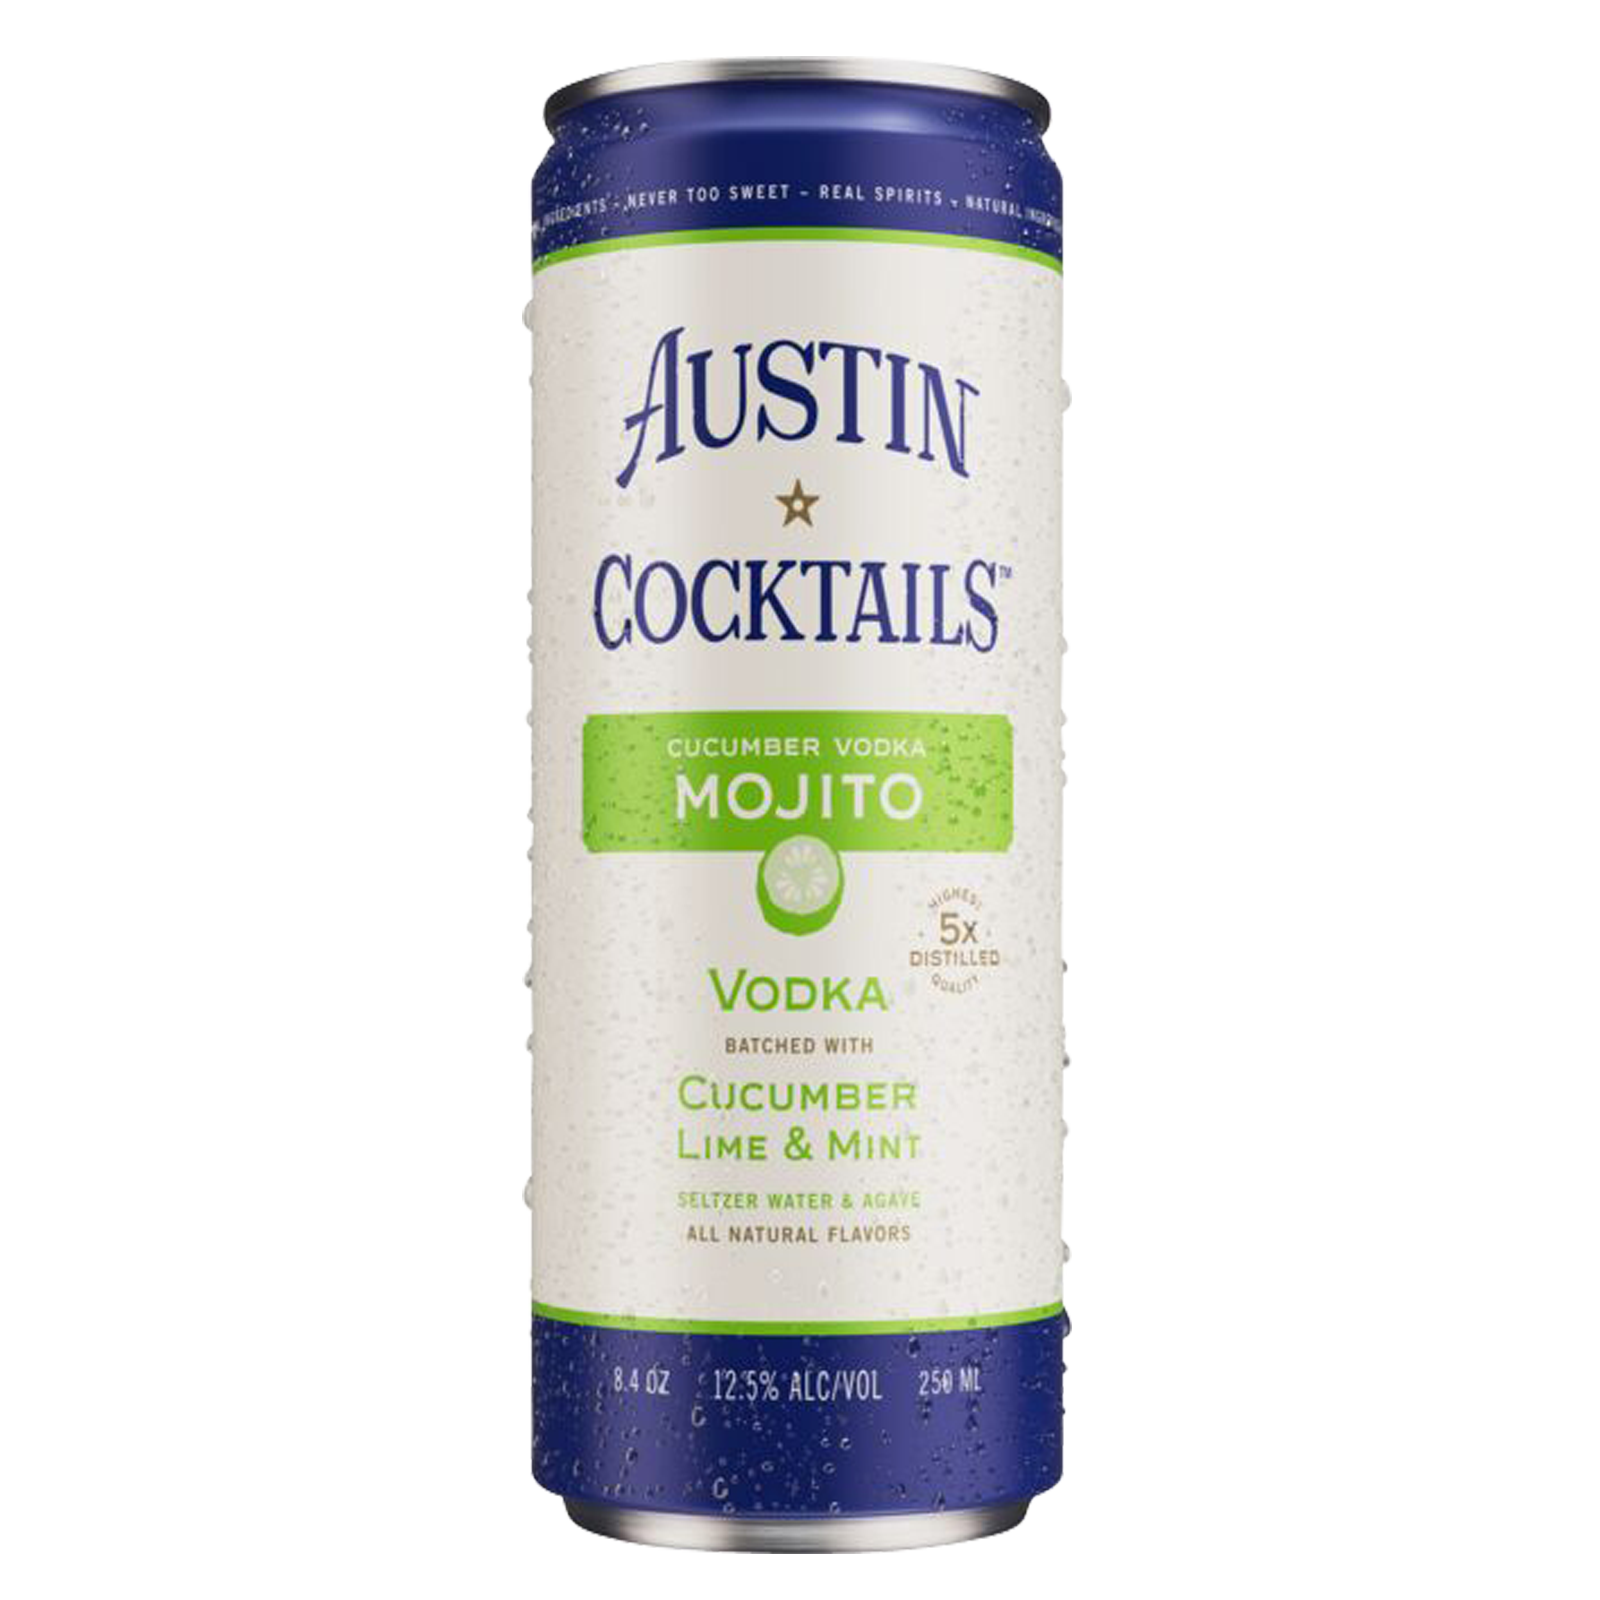 Austin Cocktails Cucumber Vodka Sparkling Mojito 250ml Can 12.5% ABV